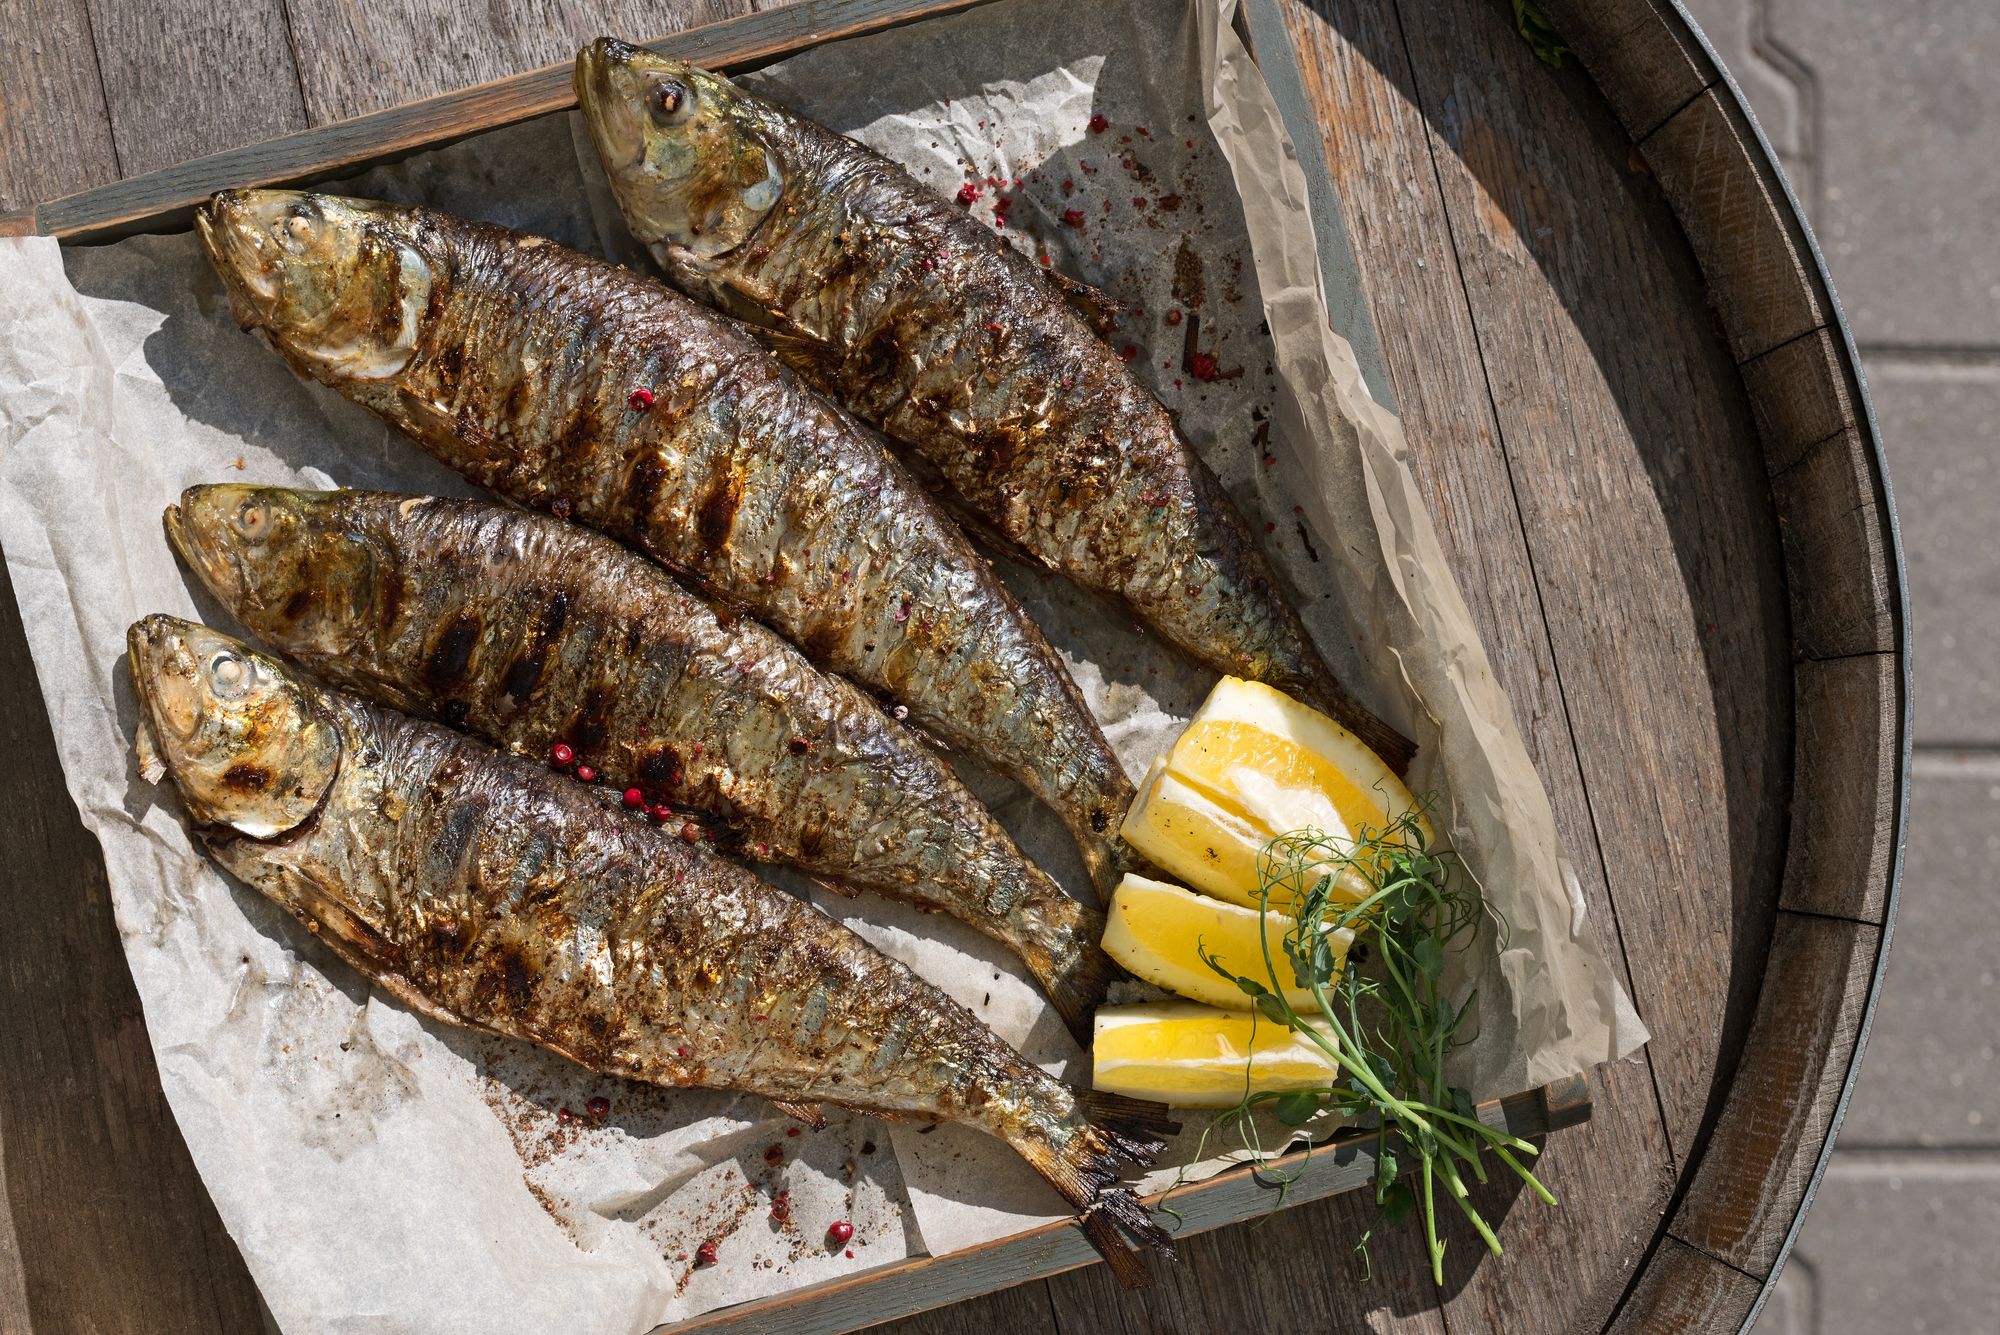 Lemon and Rosemary Barbecued Bass